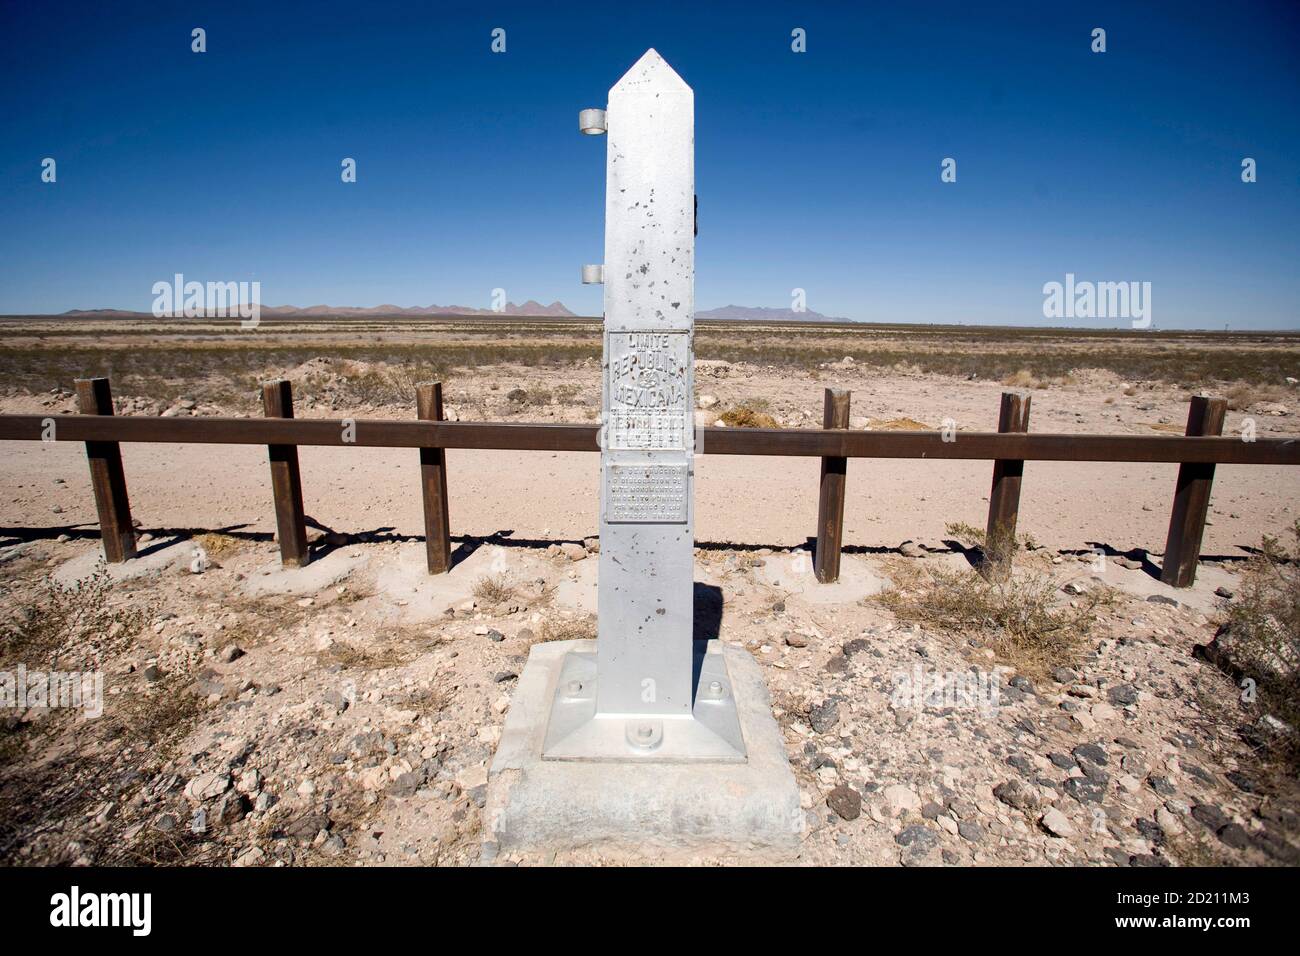 A Monument Marking The U S Boundary With Mexico Is Seen In The Mexico U S Boundary In Puerto Palomas Chihuahua March 4 08 Washington Plans To Build 670 Miles 1 070 Km Of Barriers Including